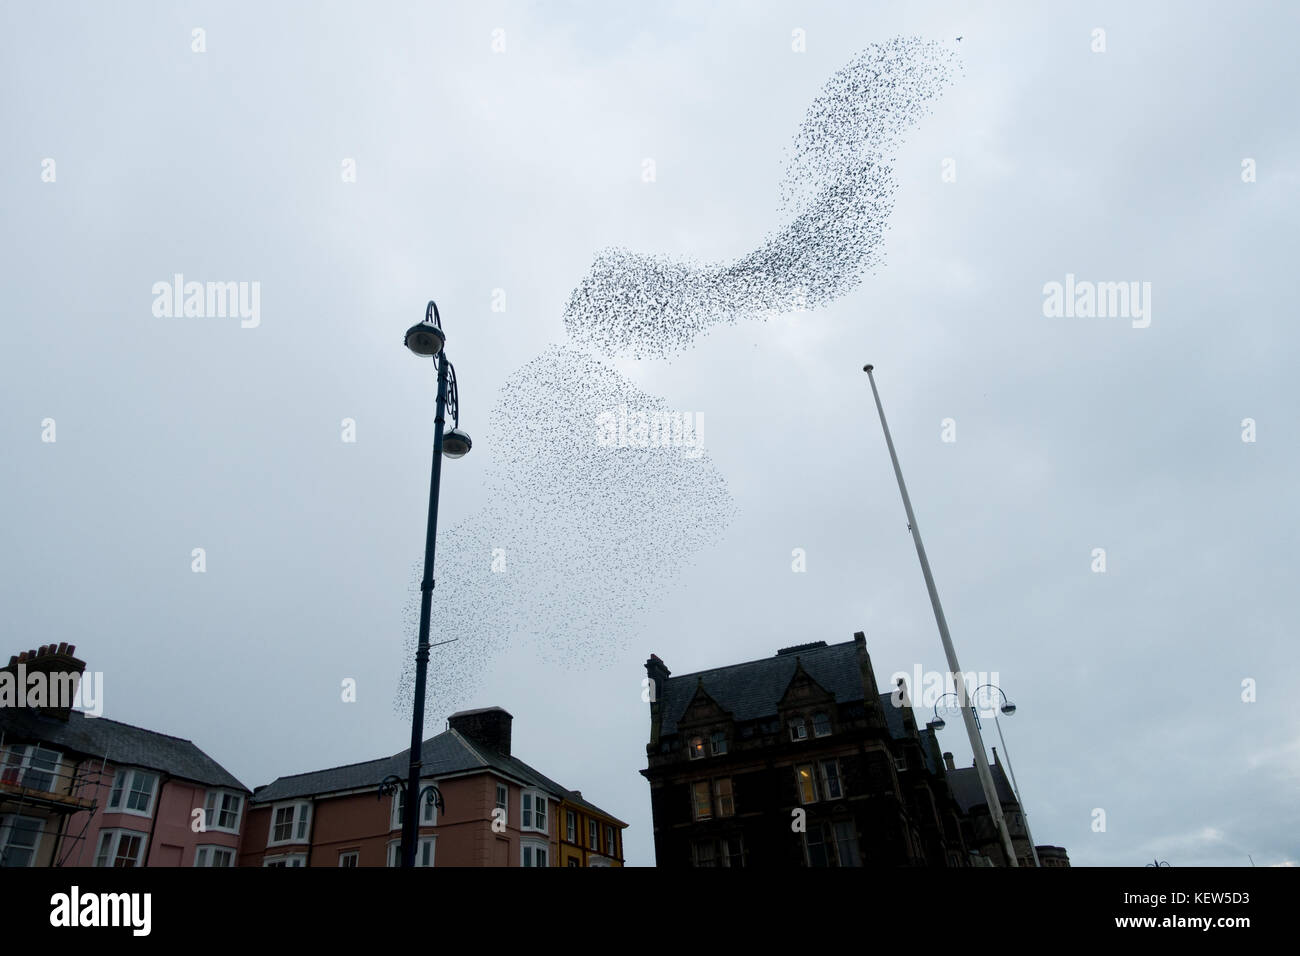 Aberystwyth, Ceredigion, UK. 23rd Oct, 2017. UK Weather. The annual winter gathering of starlings at Aberystwyth has begun, with several thousand birds converging to roost on the Royal Pier on the promenade. Credit: atgof.co/Alamy Live News Stock Photo